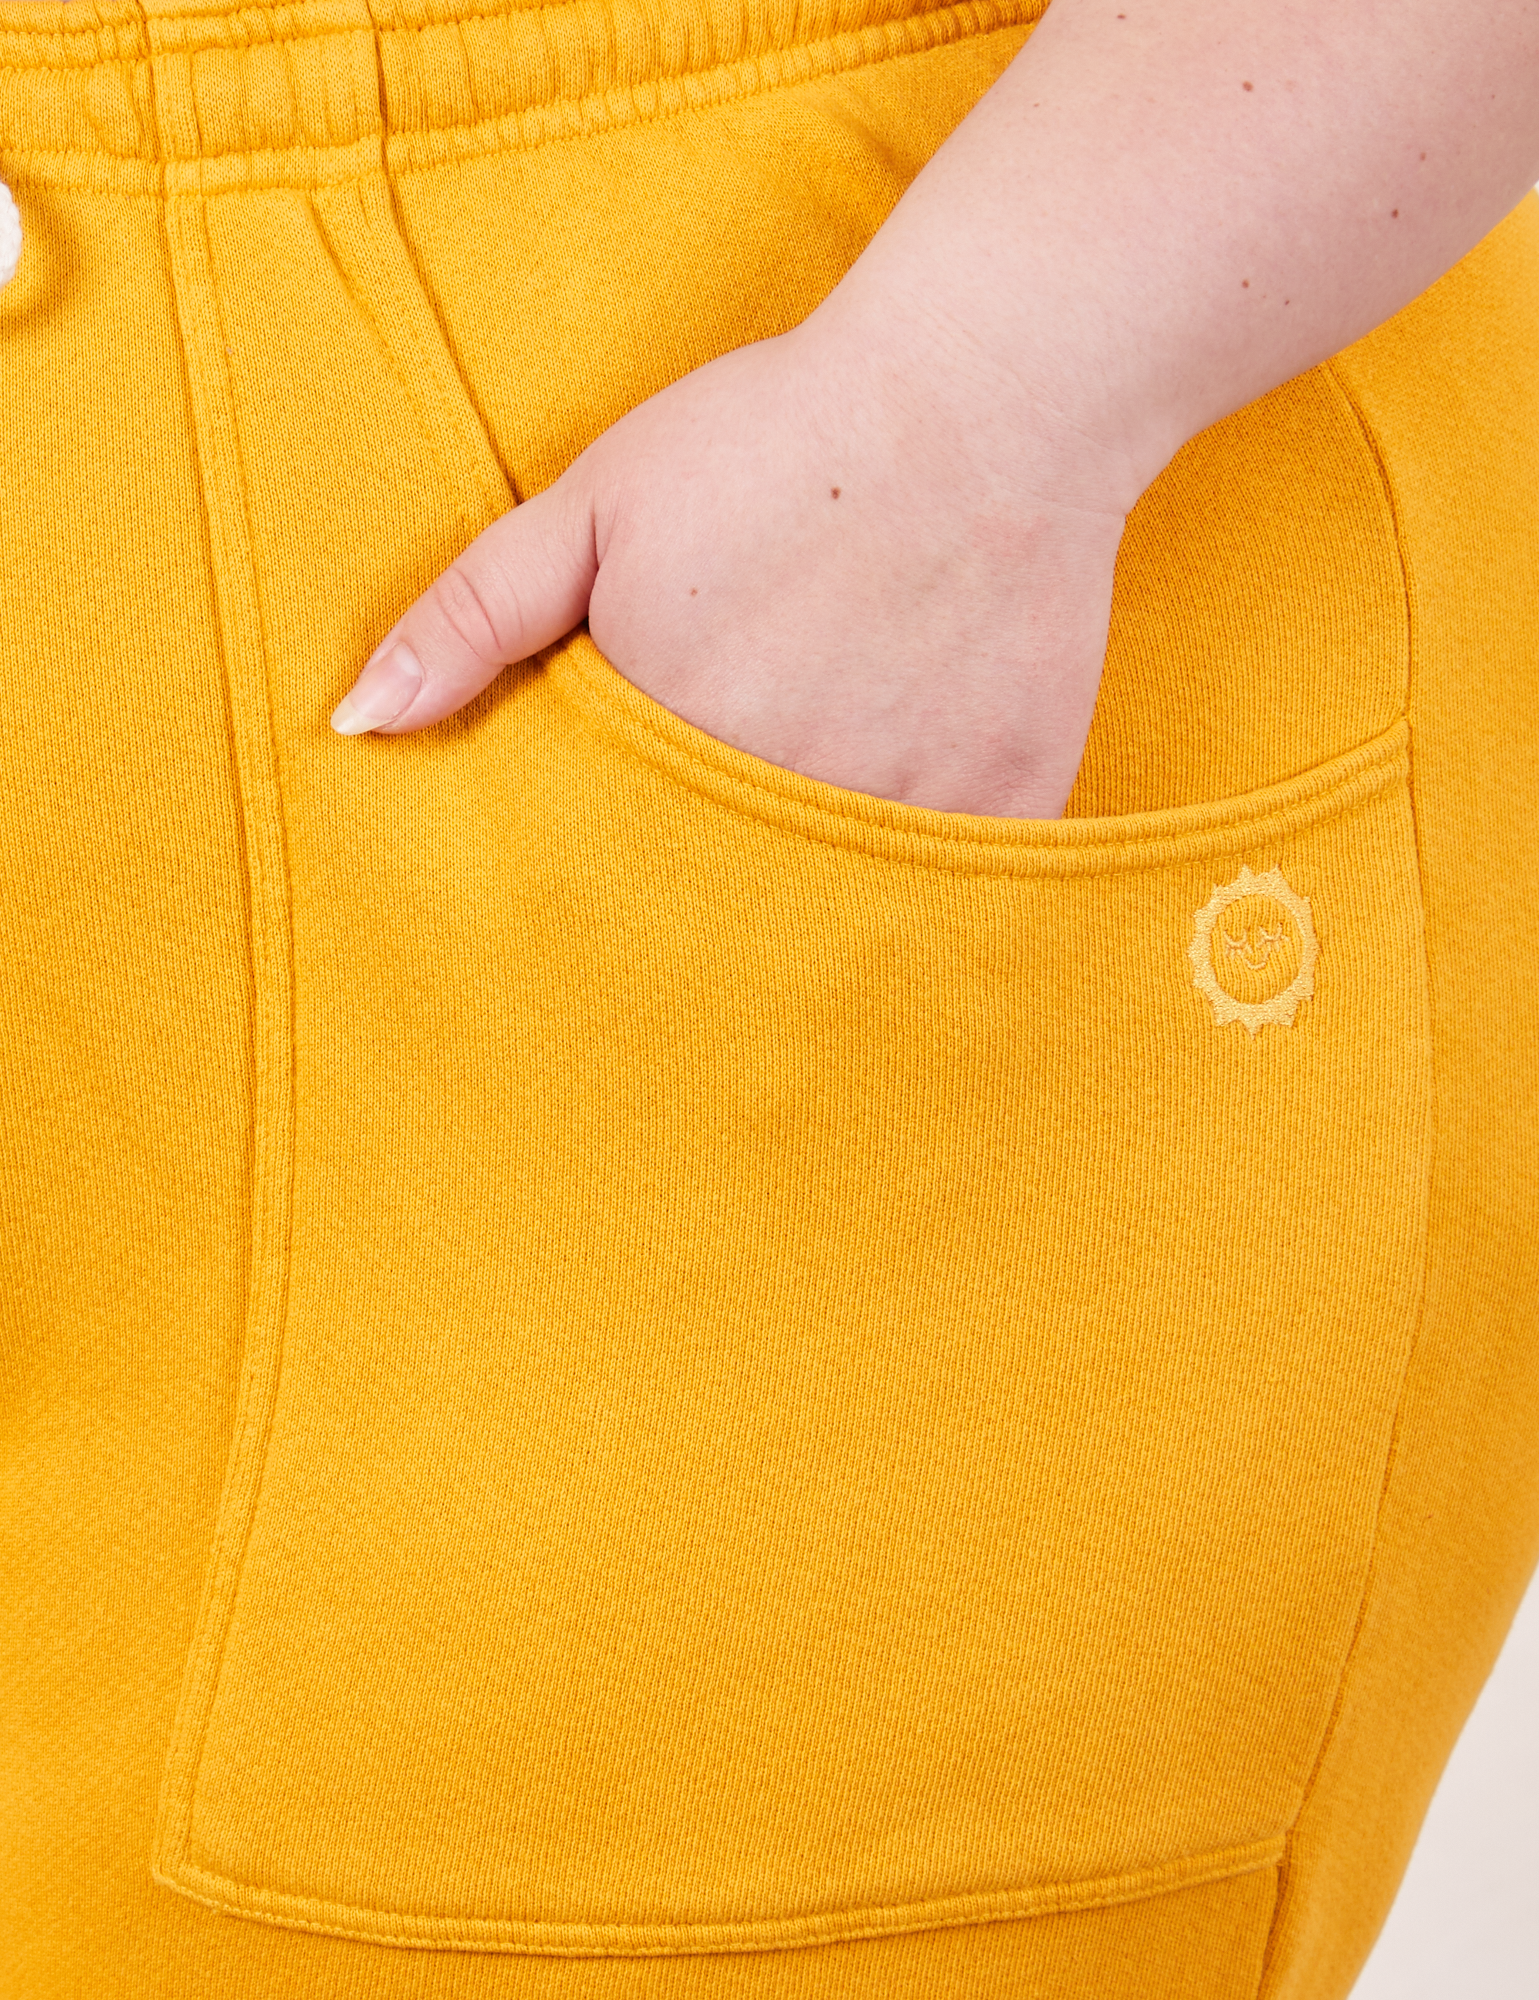 Cropped Rolled Cuff Sweatpants in Mustard Yellow front pocket close up. Ashley has her hand in the pocket.